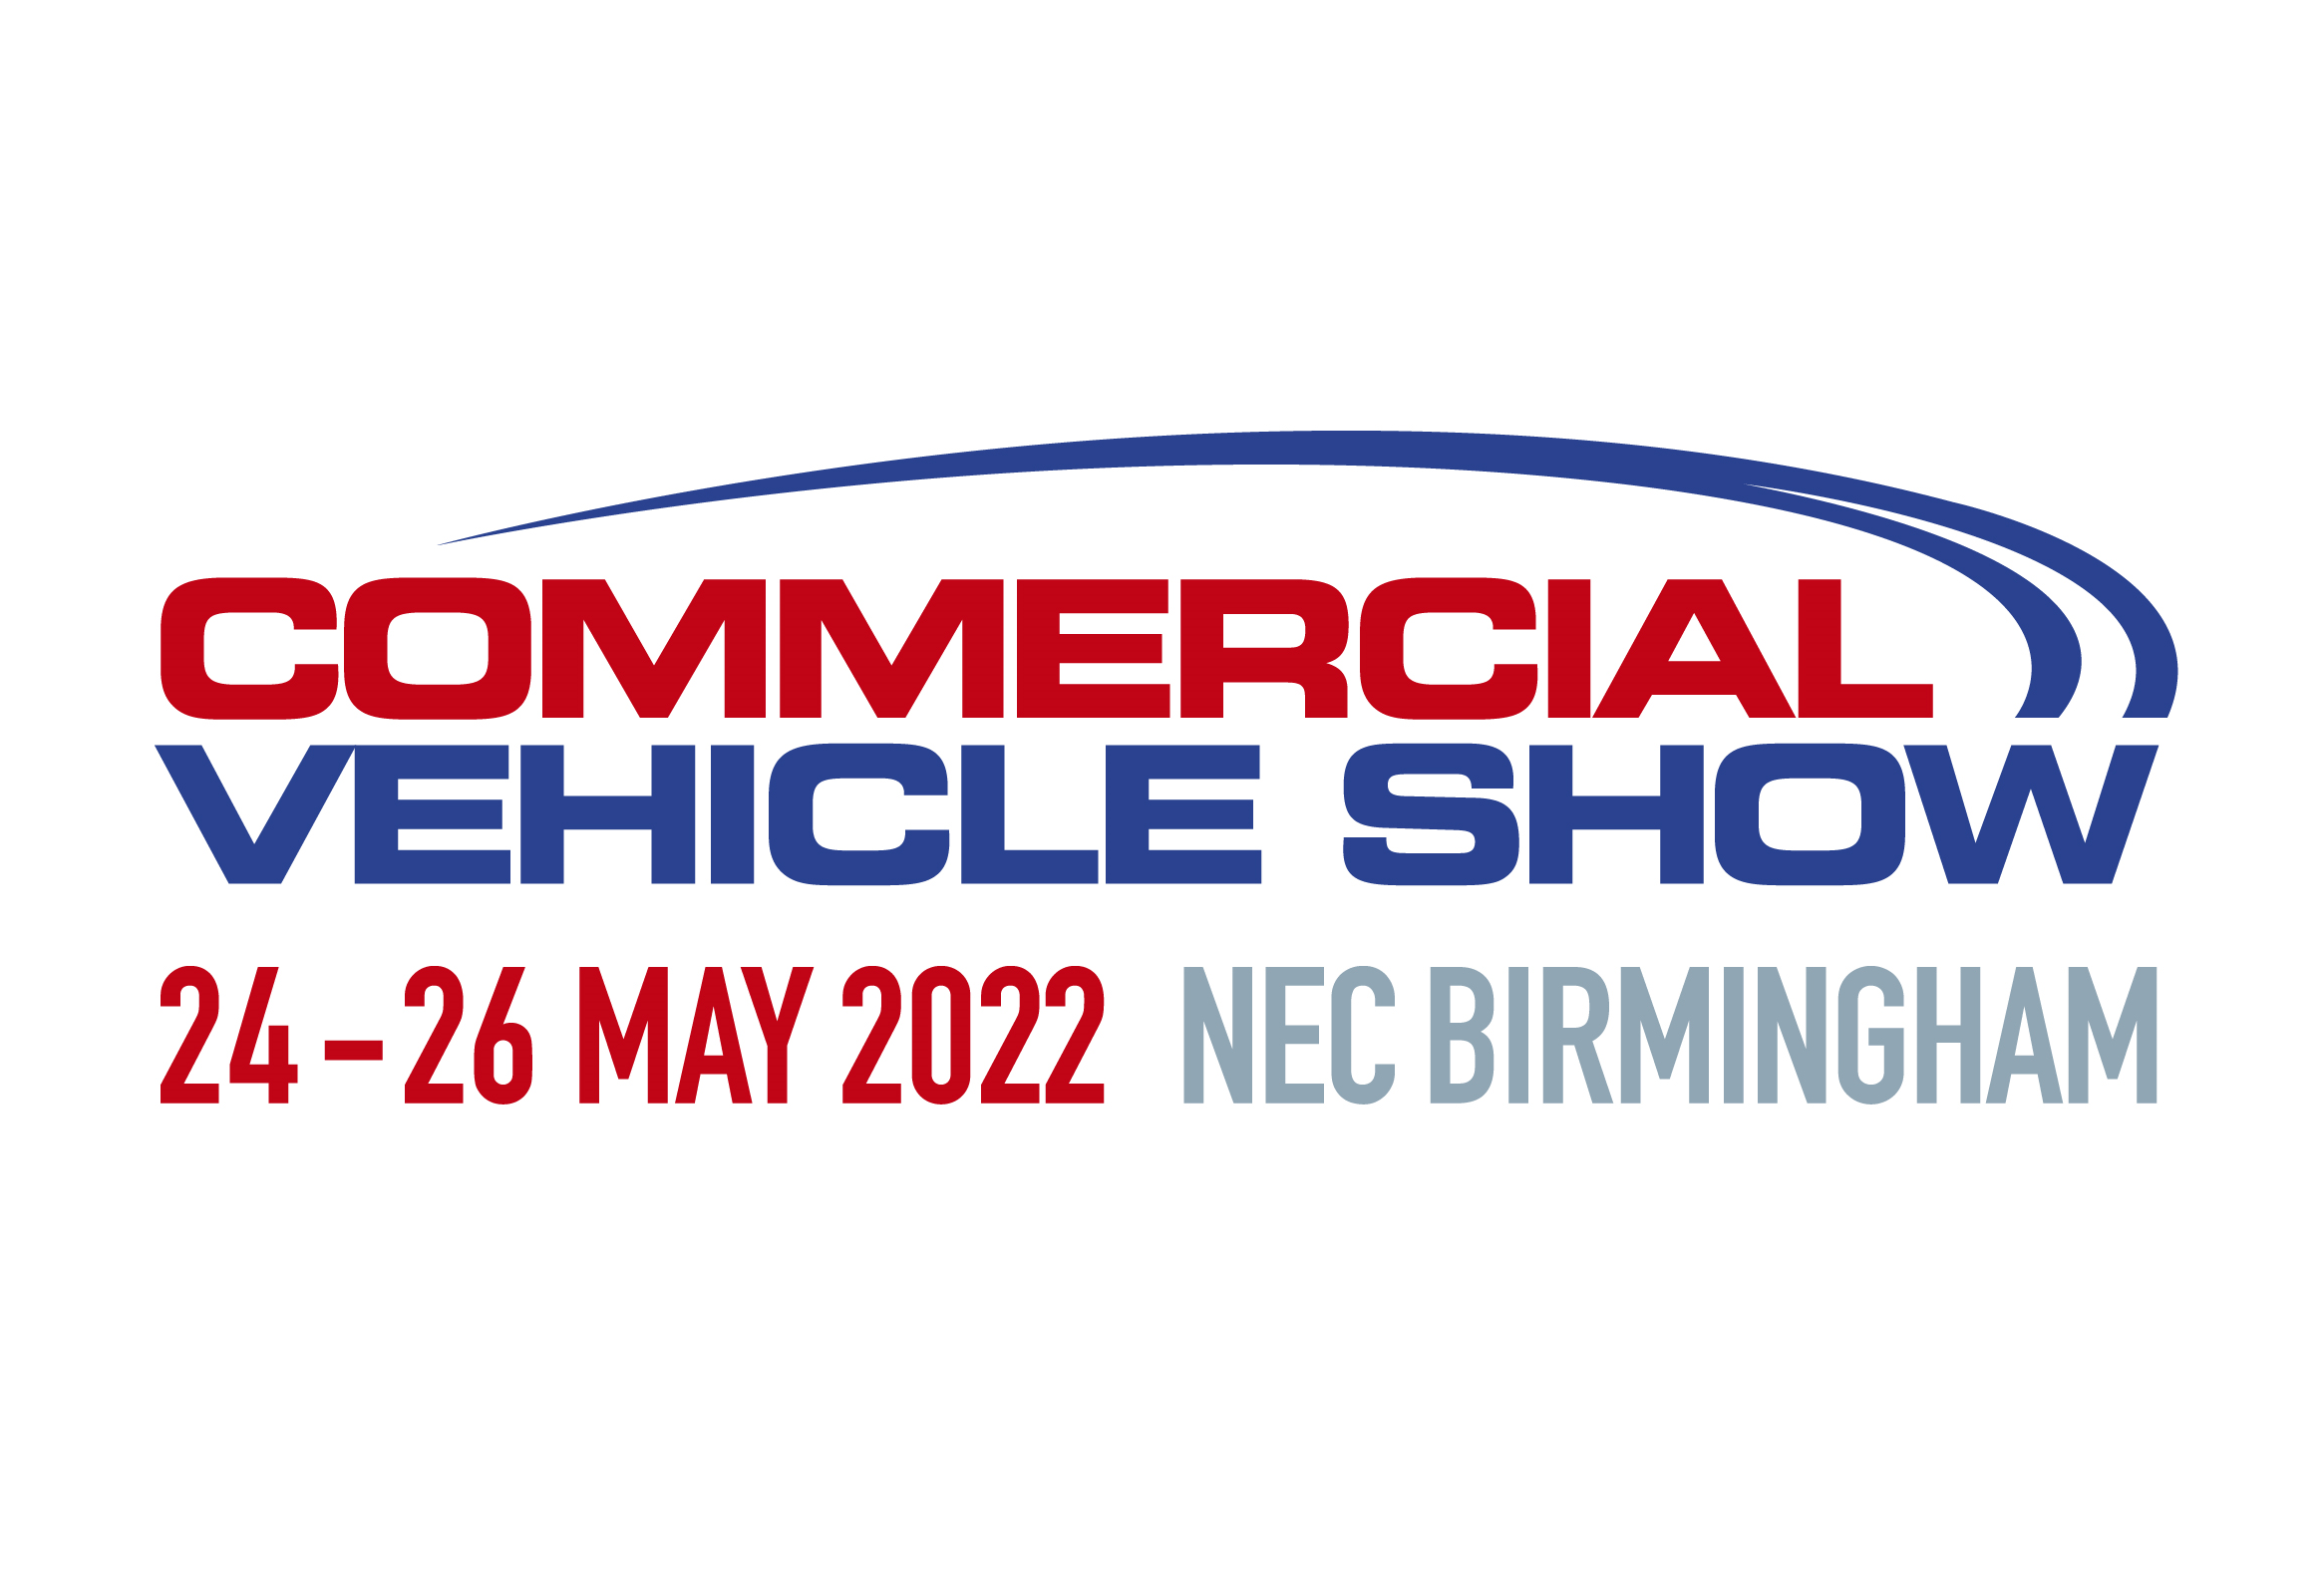 Lightfoot is attending the Commercial Vehicle Show 2022